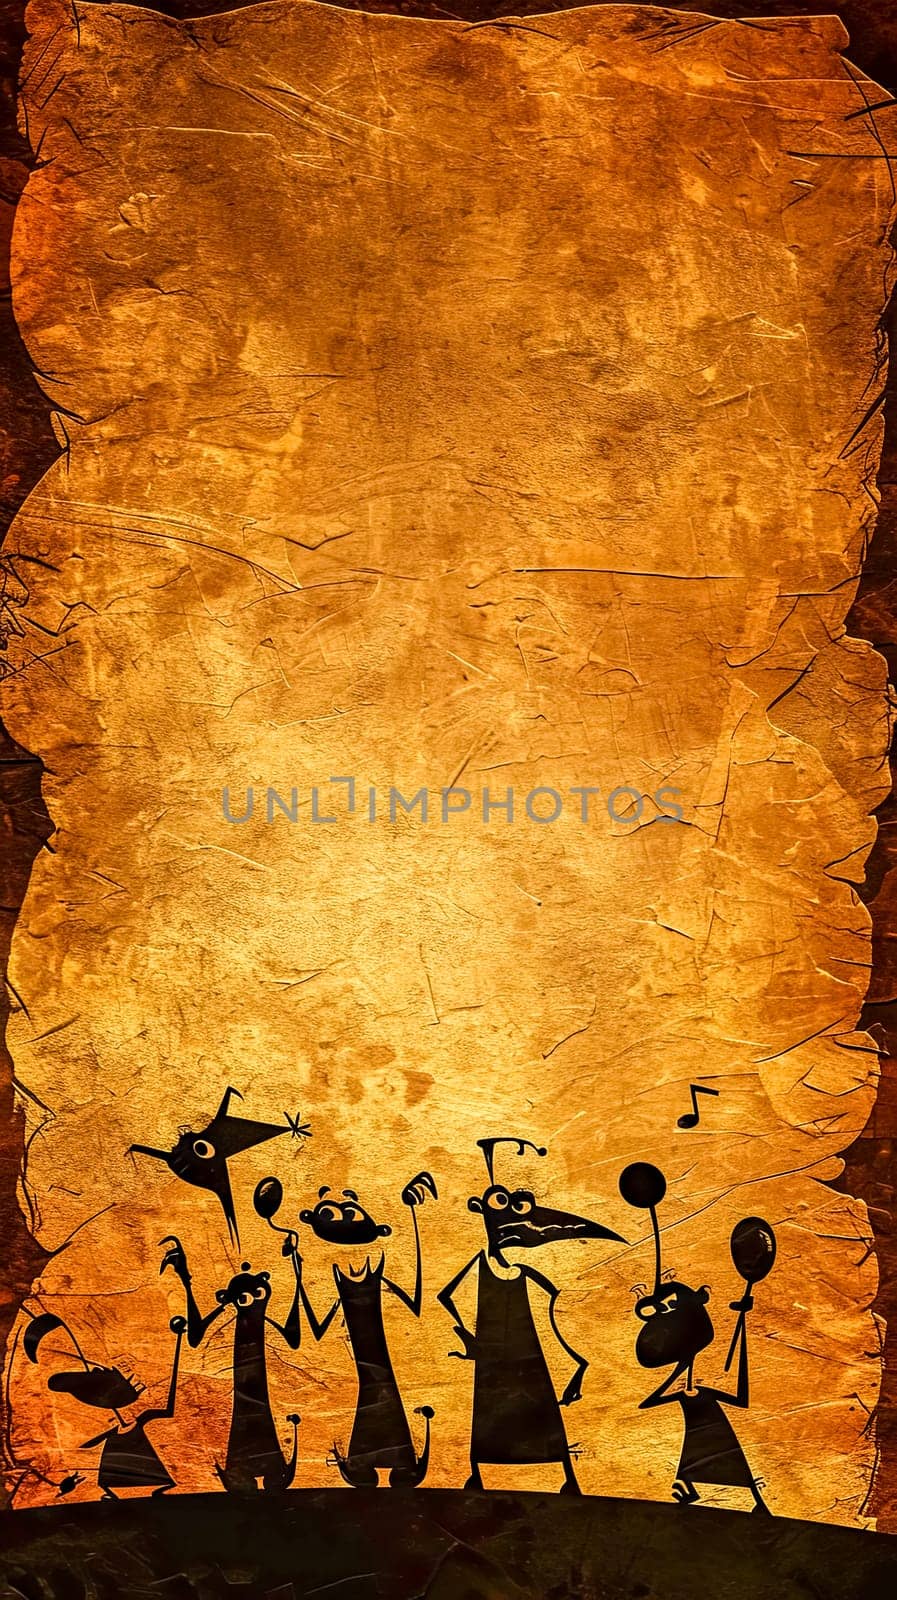 silhouetted cartoon figures on an aged parchment background, reminiscent of ancient cave drawings with a humorous twist. by Edophoto